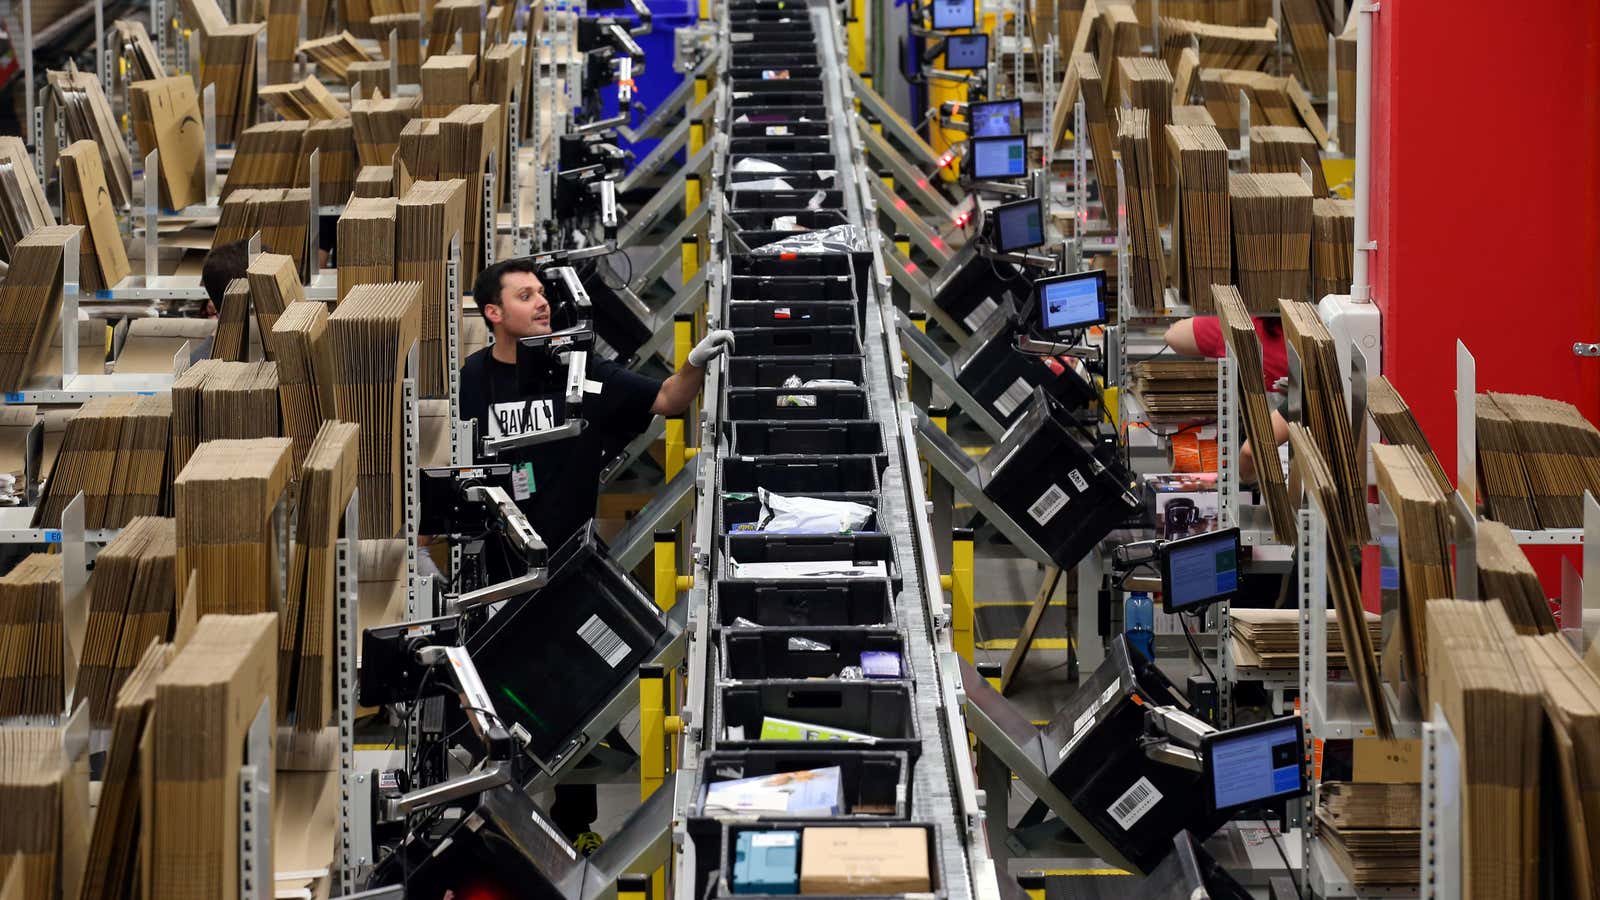 Working life at an Amazon facility in Spain.